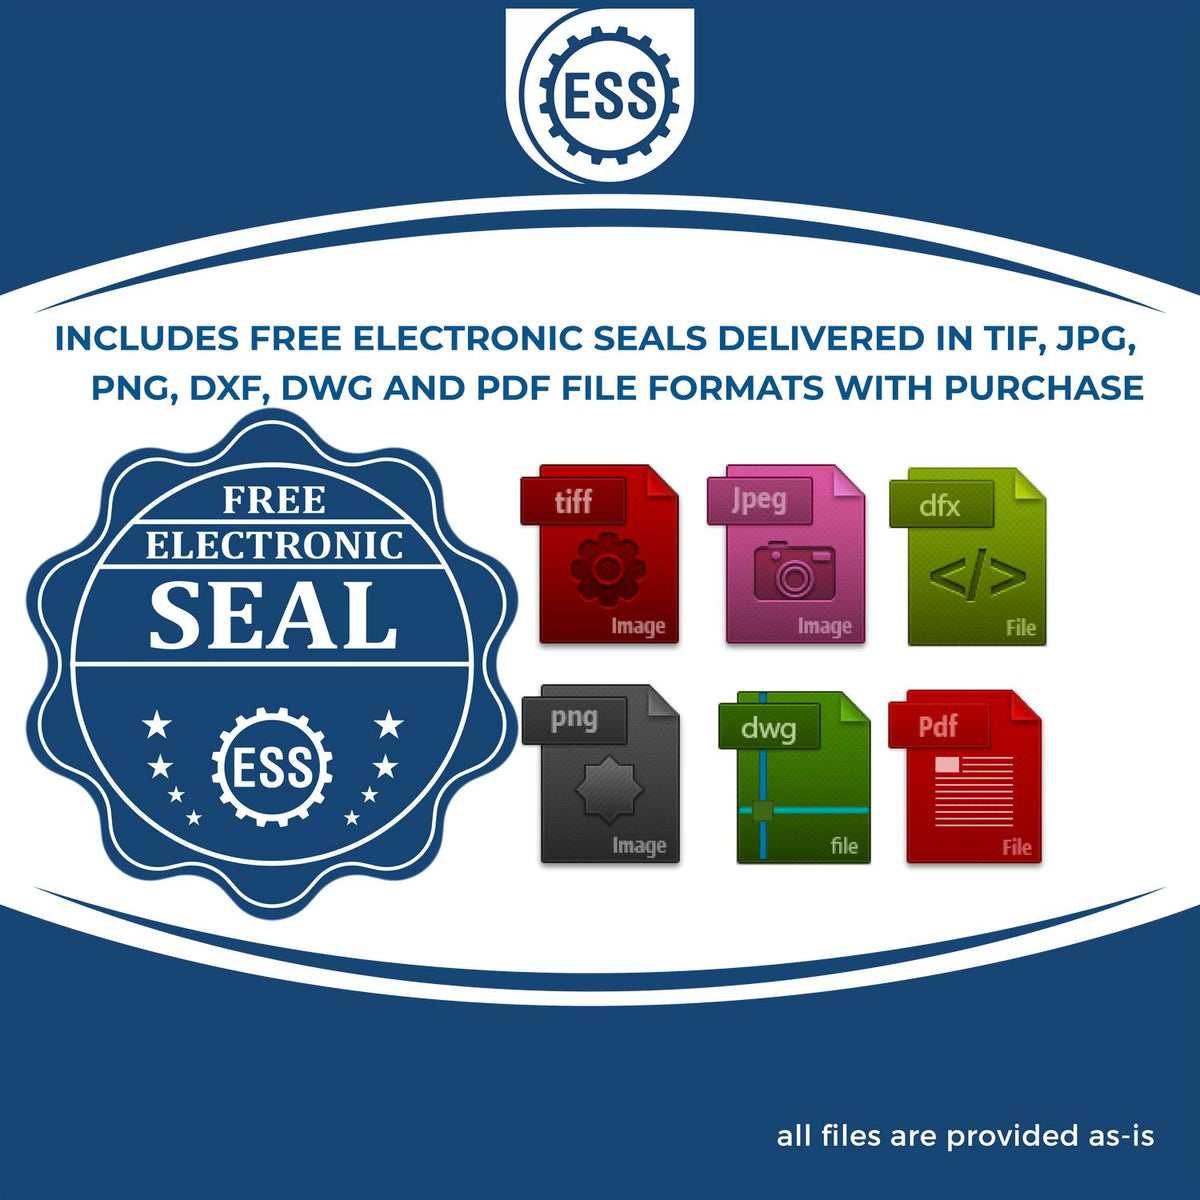 An infographic for the free electronic seal for the Extended Long Reach Minnesota Surveyor Embosser illustrating the different file type icons such as DXF, DWG, TIF, JPG and PNG.